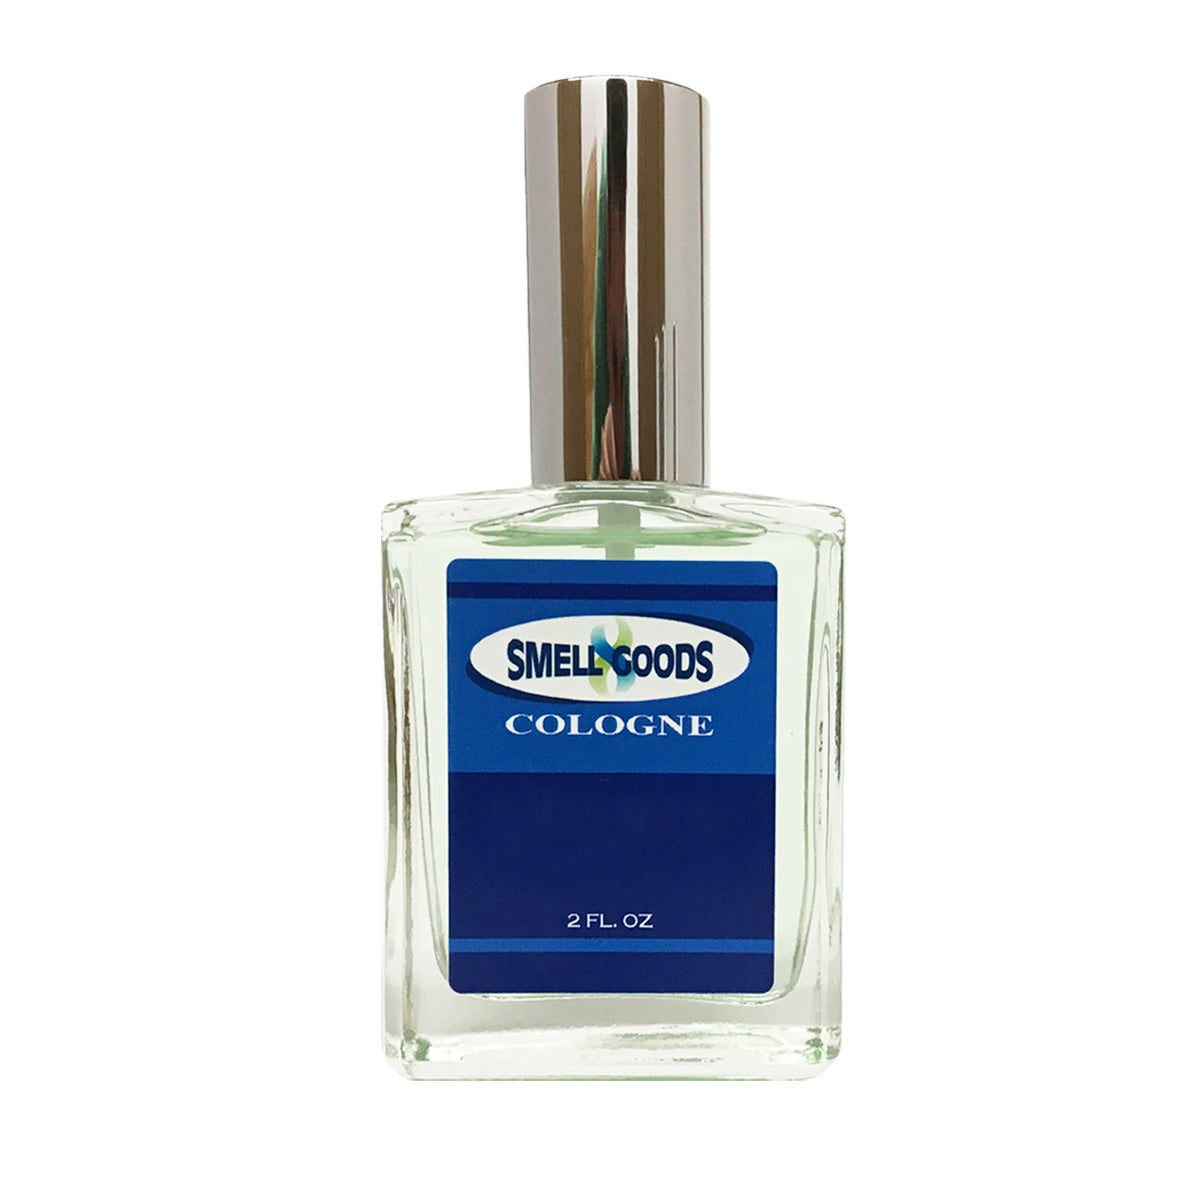 The One by Dolce & Gabbana Type (Men) Cologne Spray